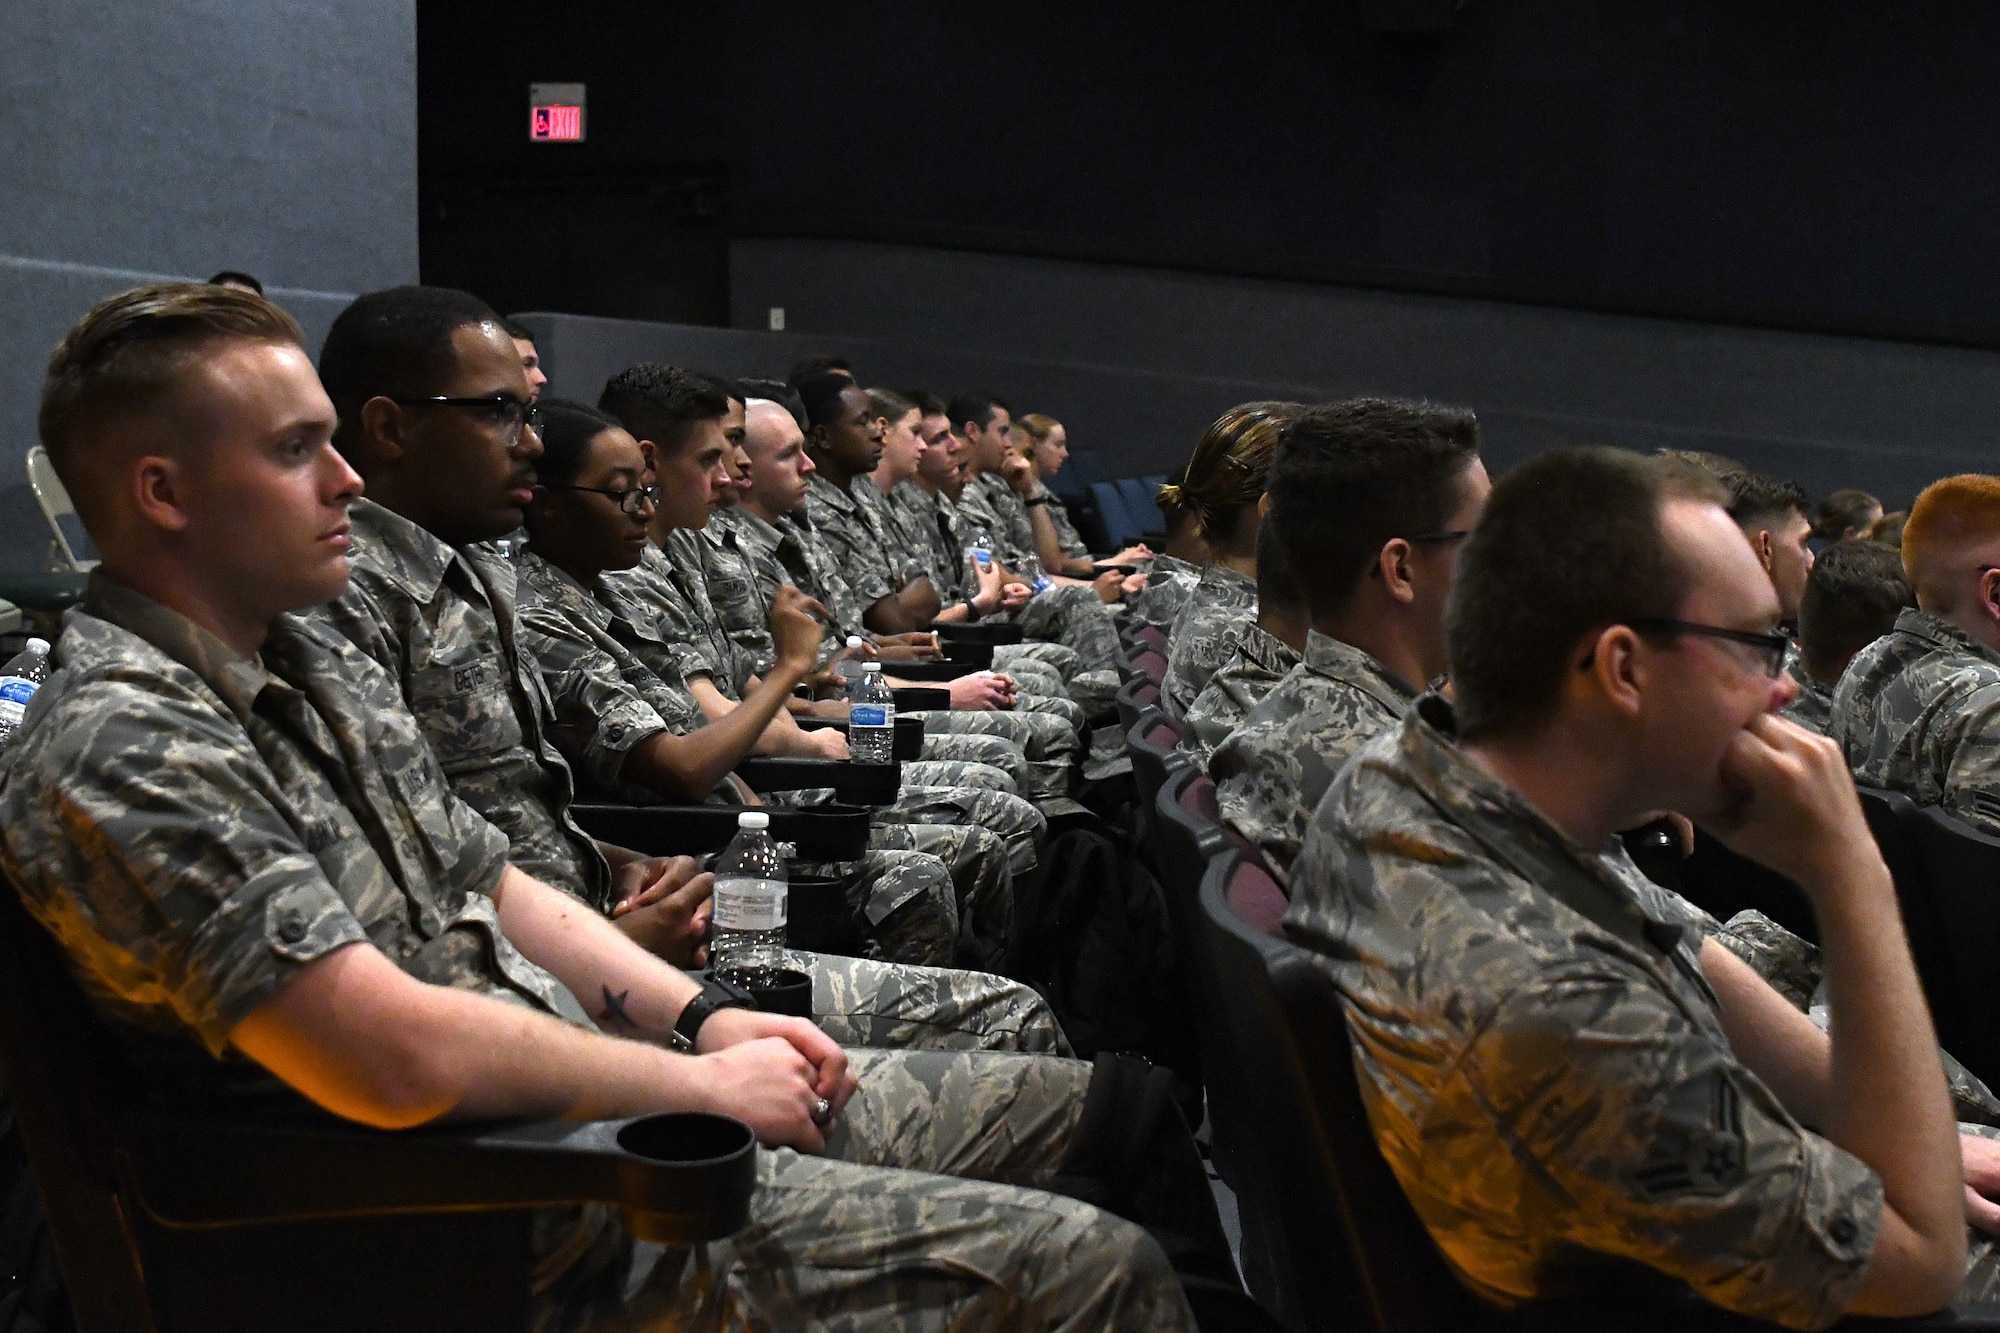 Keesler Airmen attend the Airmen Building Airmen Symposium at the Welch Theater at Keesler Air Force Base, Mississippi, April 6, 2018. The symposium included a guest speaker, a question and answer panel and a video. The symposium was held to empower Airmen and help them understand the impact they have on the future of the Air Force. (U.S. Air Force photo by Airman 1st Class Suzie Plotnikov)